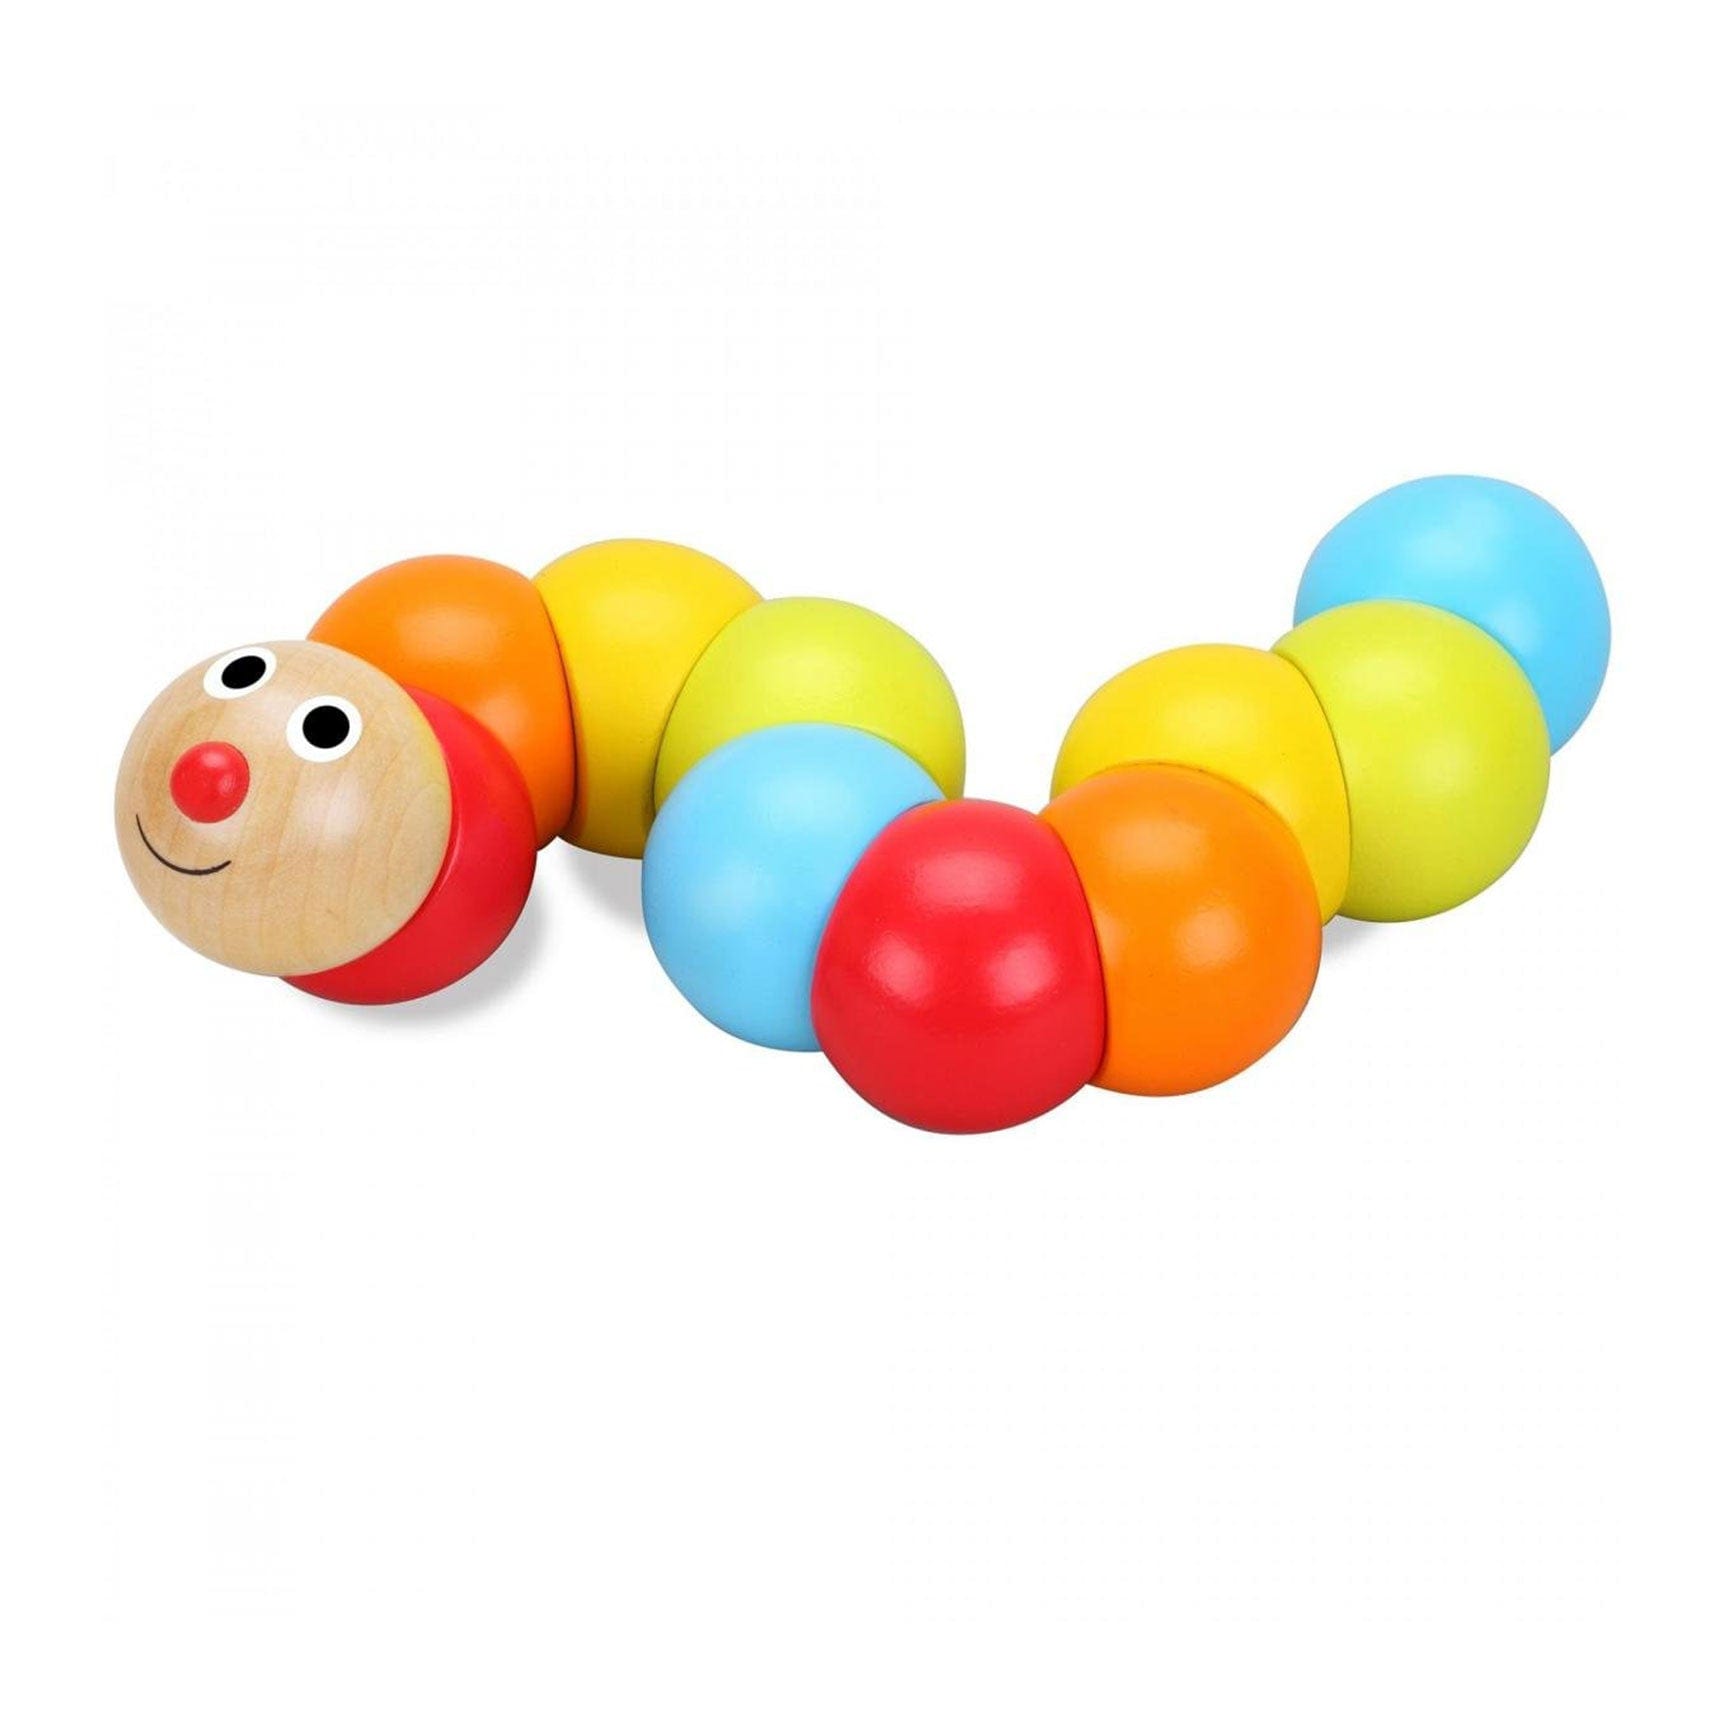 Classic World sensory baby toys Classic World Caterpillar - Primary Colours CW3505